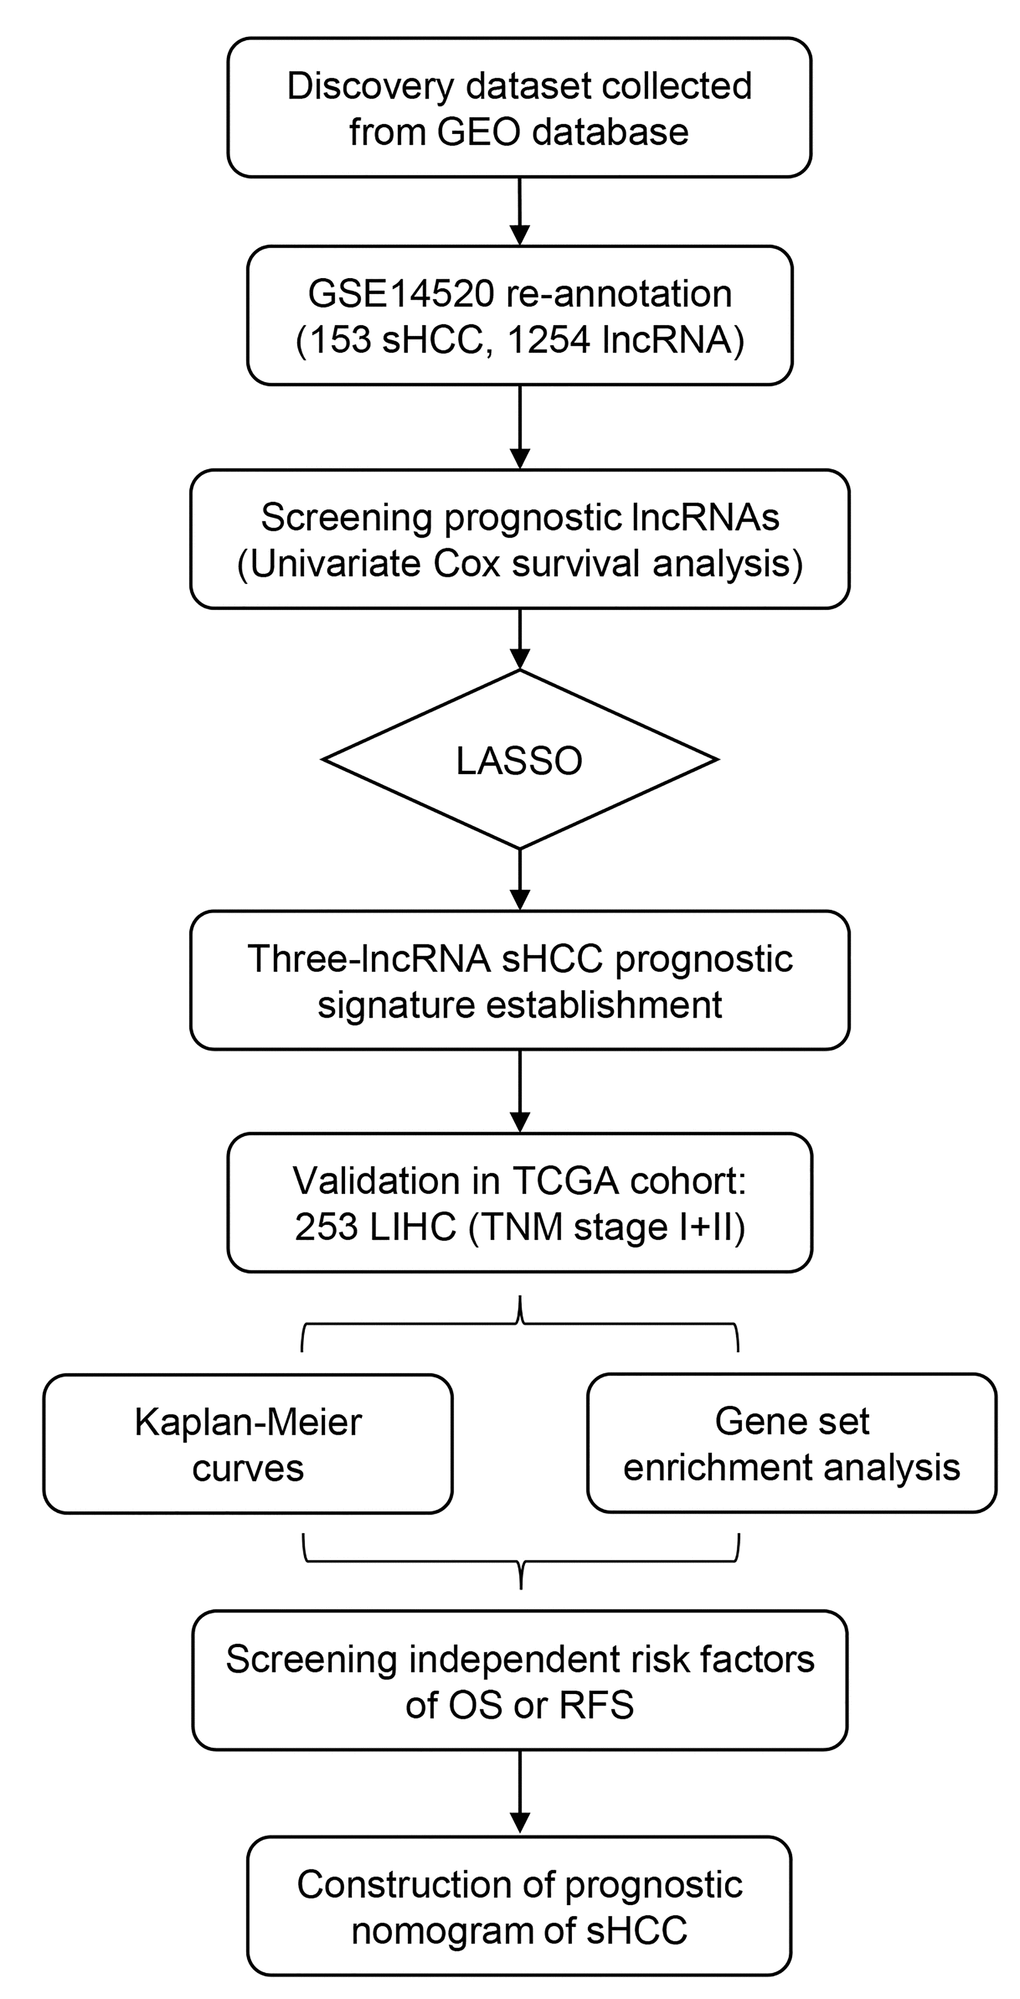 Overview of the analytic pipeline of this study.